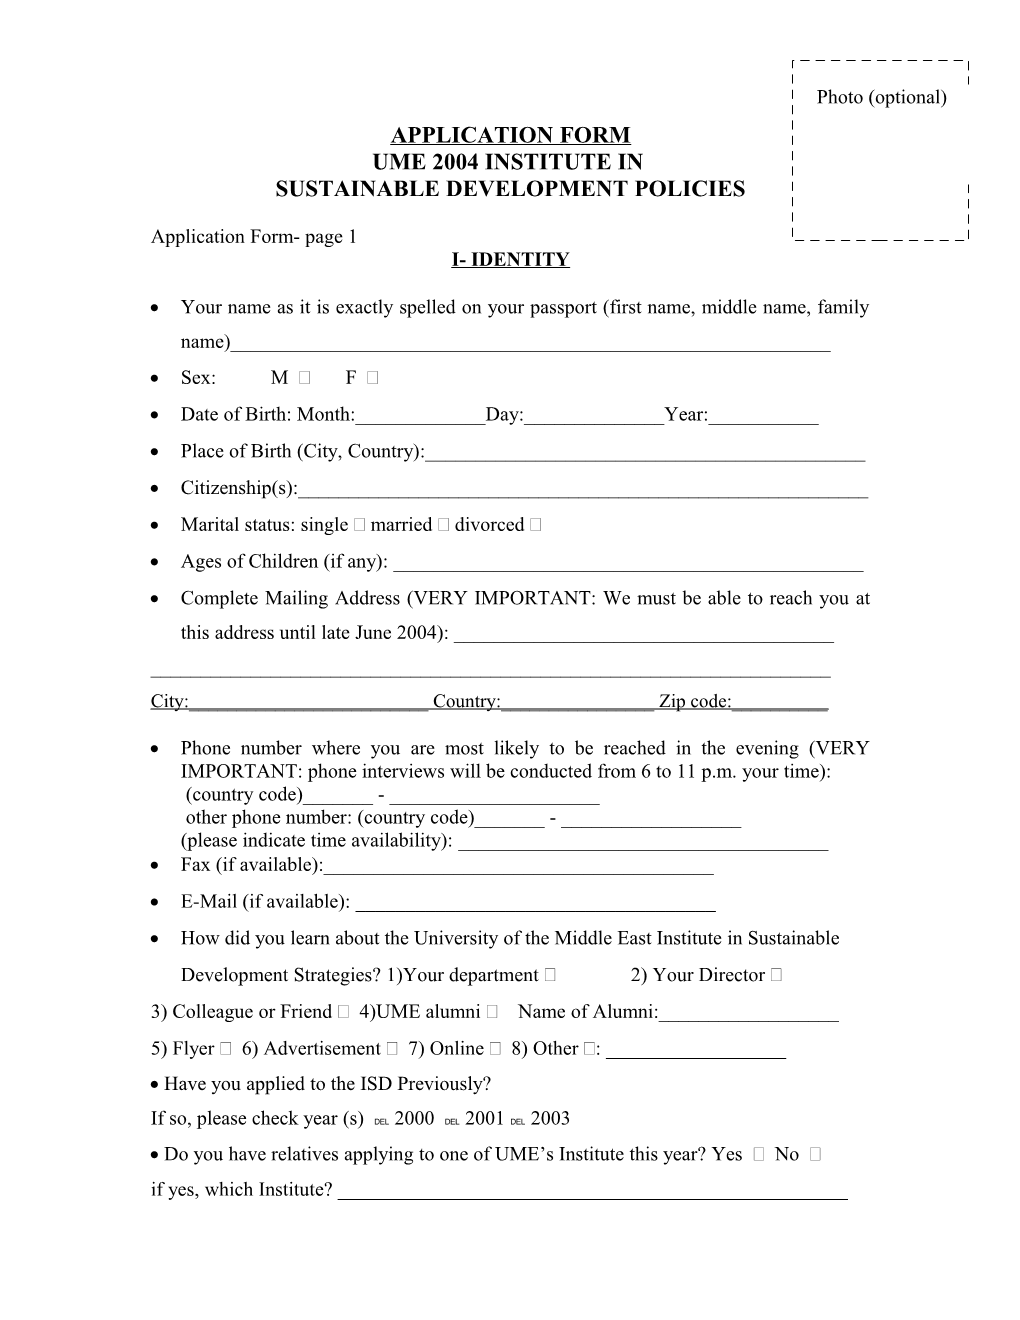 Application Form s47